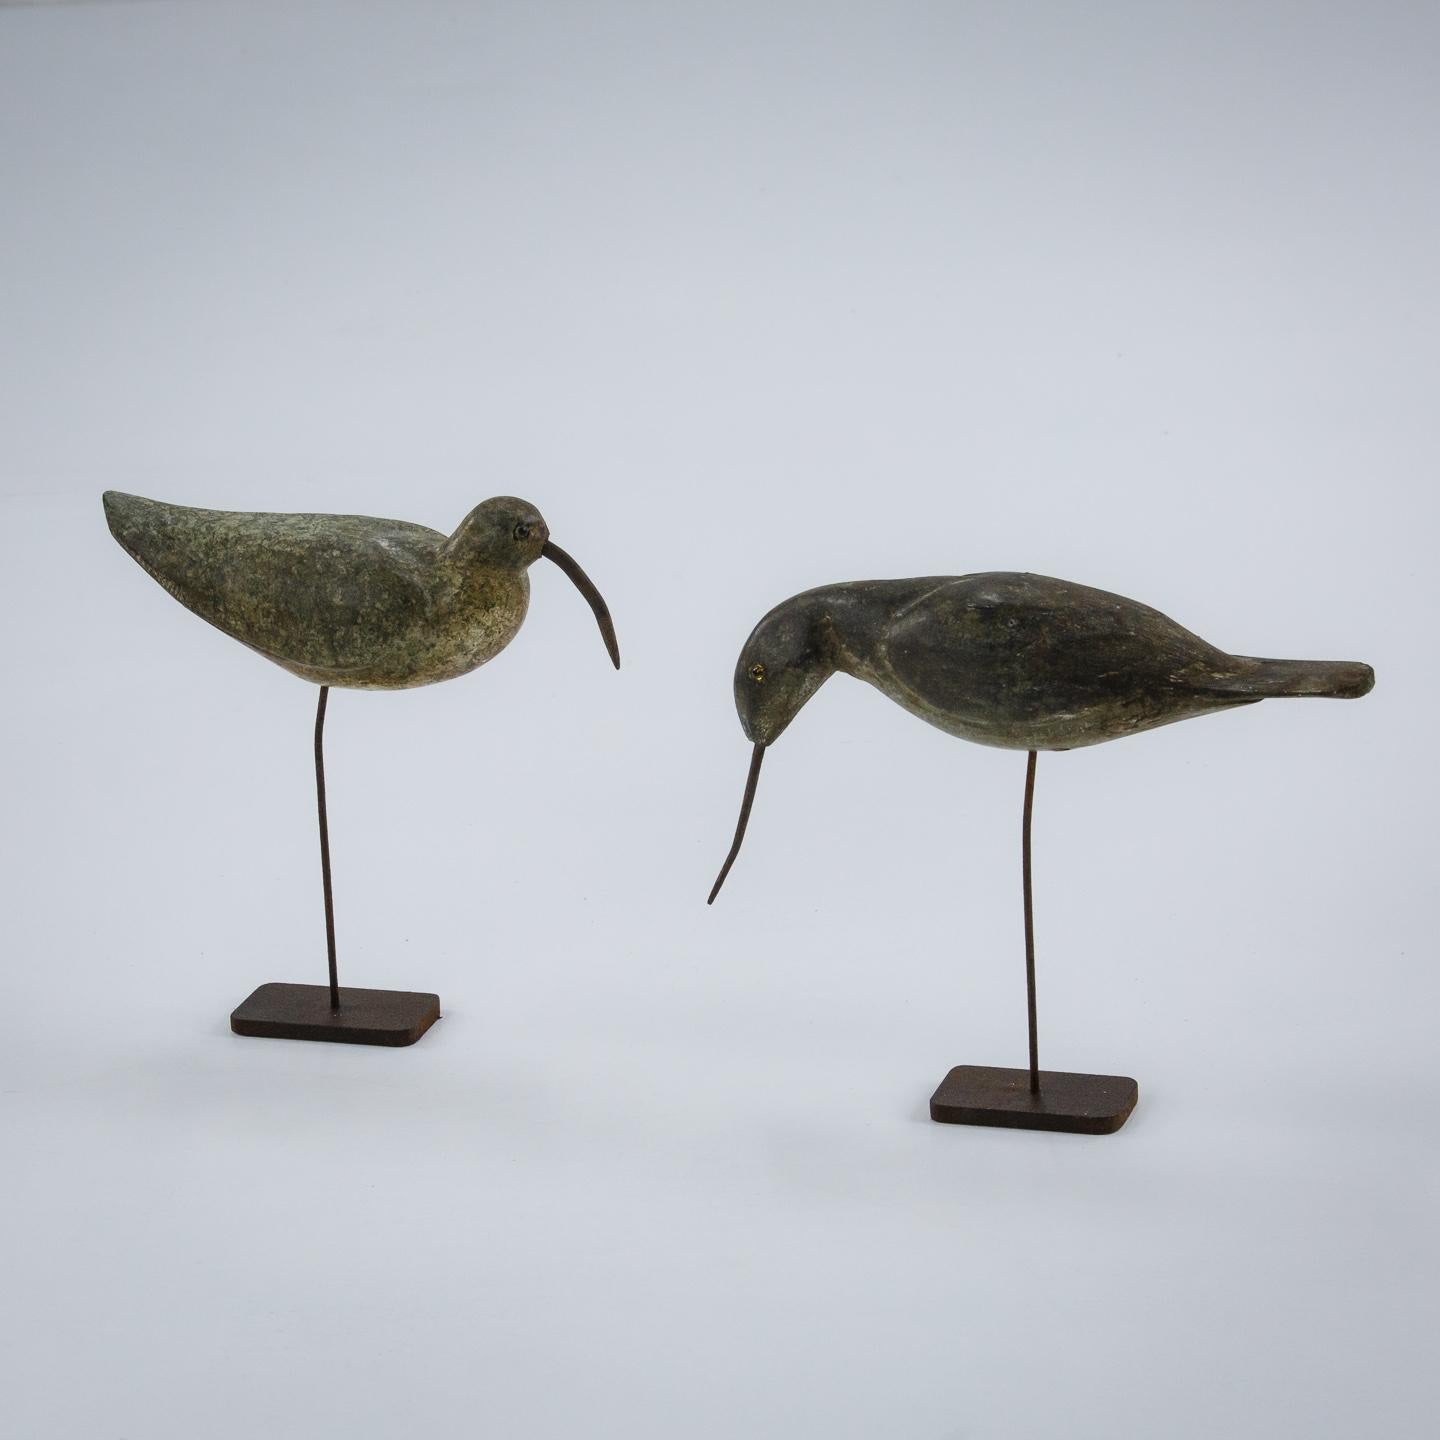 Pair of primitive working shorebird decoys, both with iron bills or beaks, carved painted wood. As expected wear and paint loss. Baie de Somme France Circa 1950.